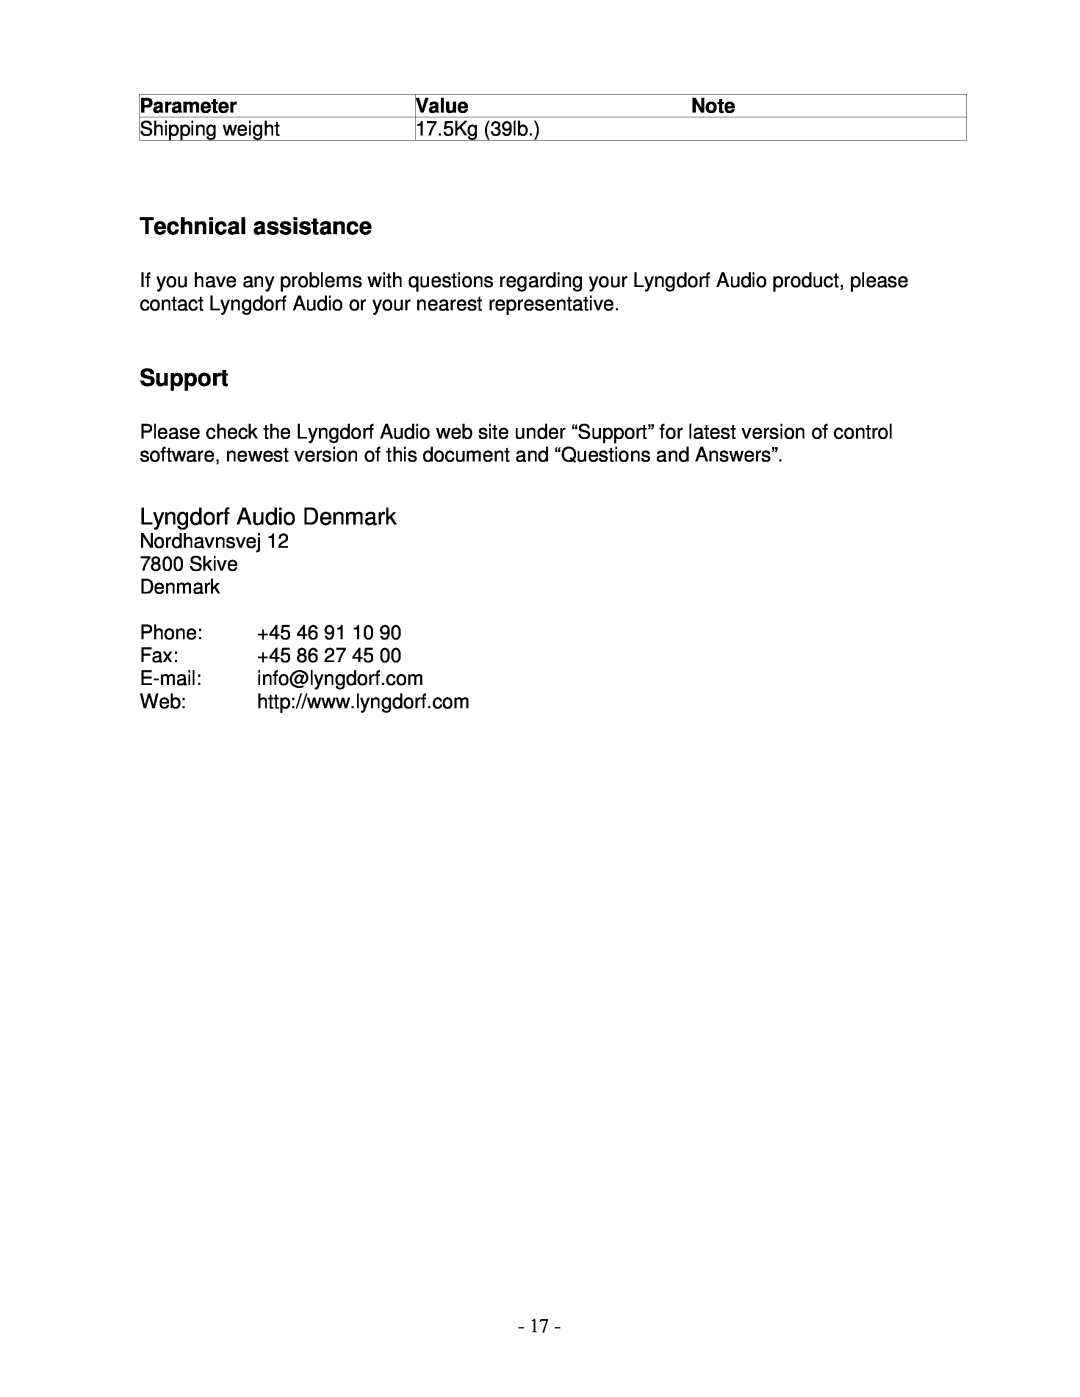 Lyngdorf Audio SDAI 2175 owner manual Technical assistance, Support, Lyngdorf Audio Denmark 